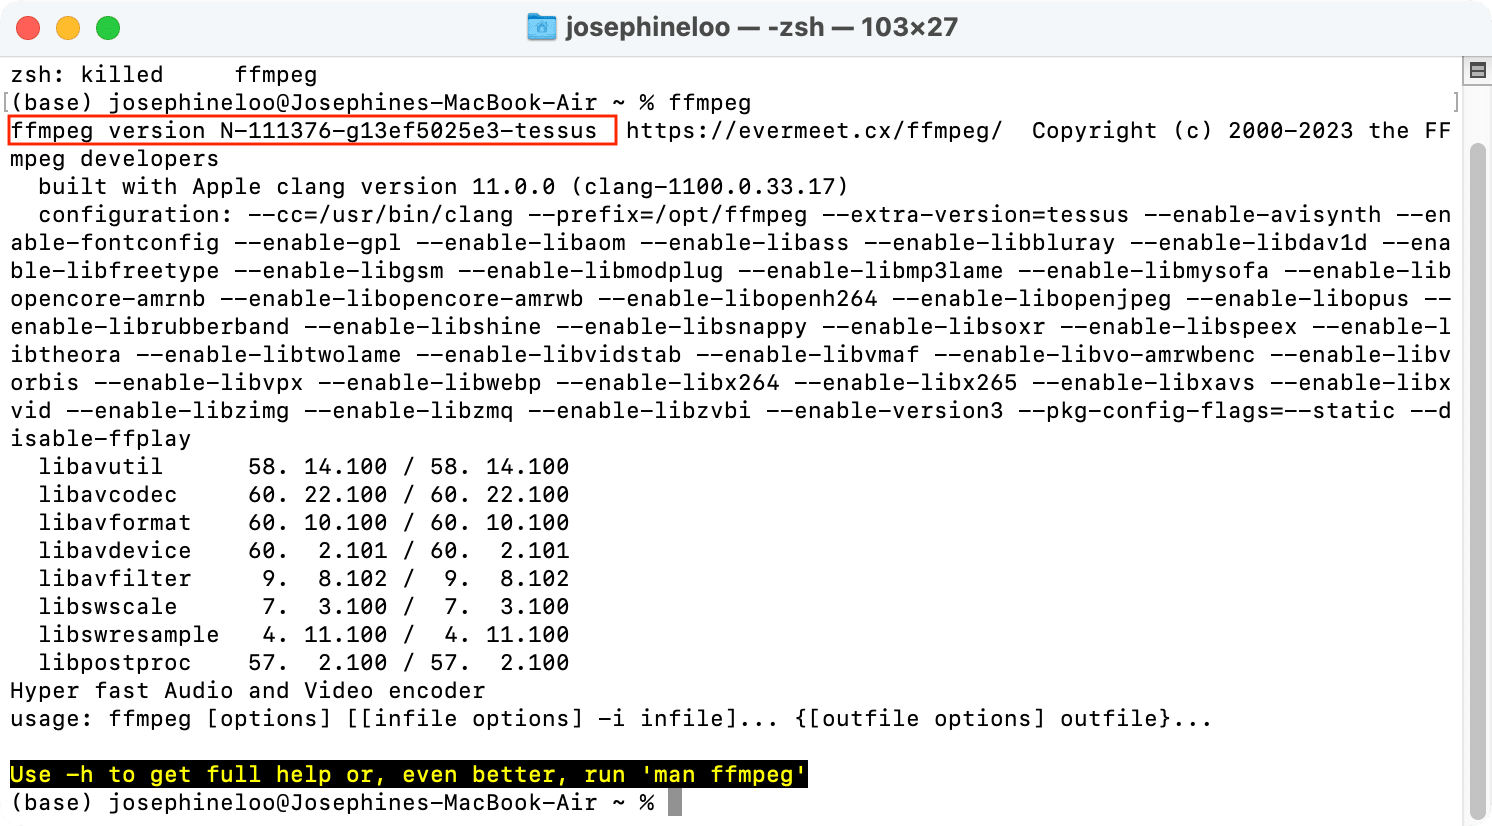 an output of the 'ffmpeg' command after installing manually